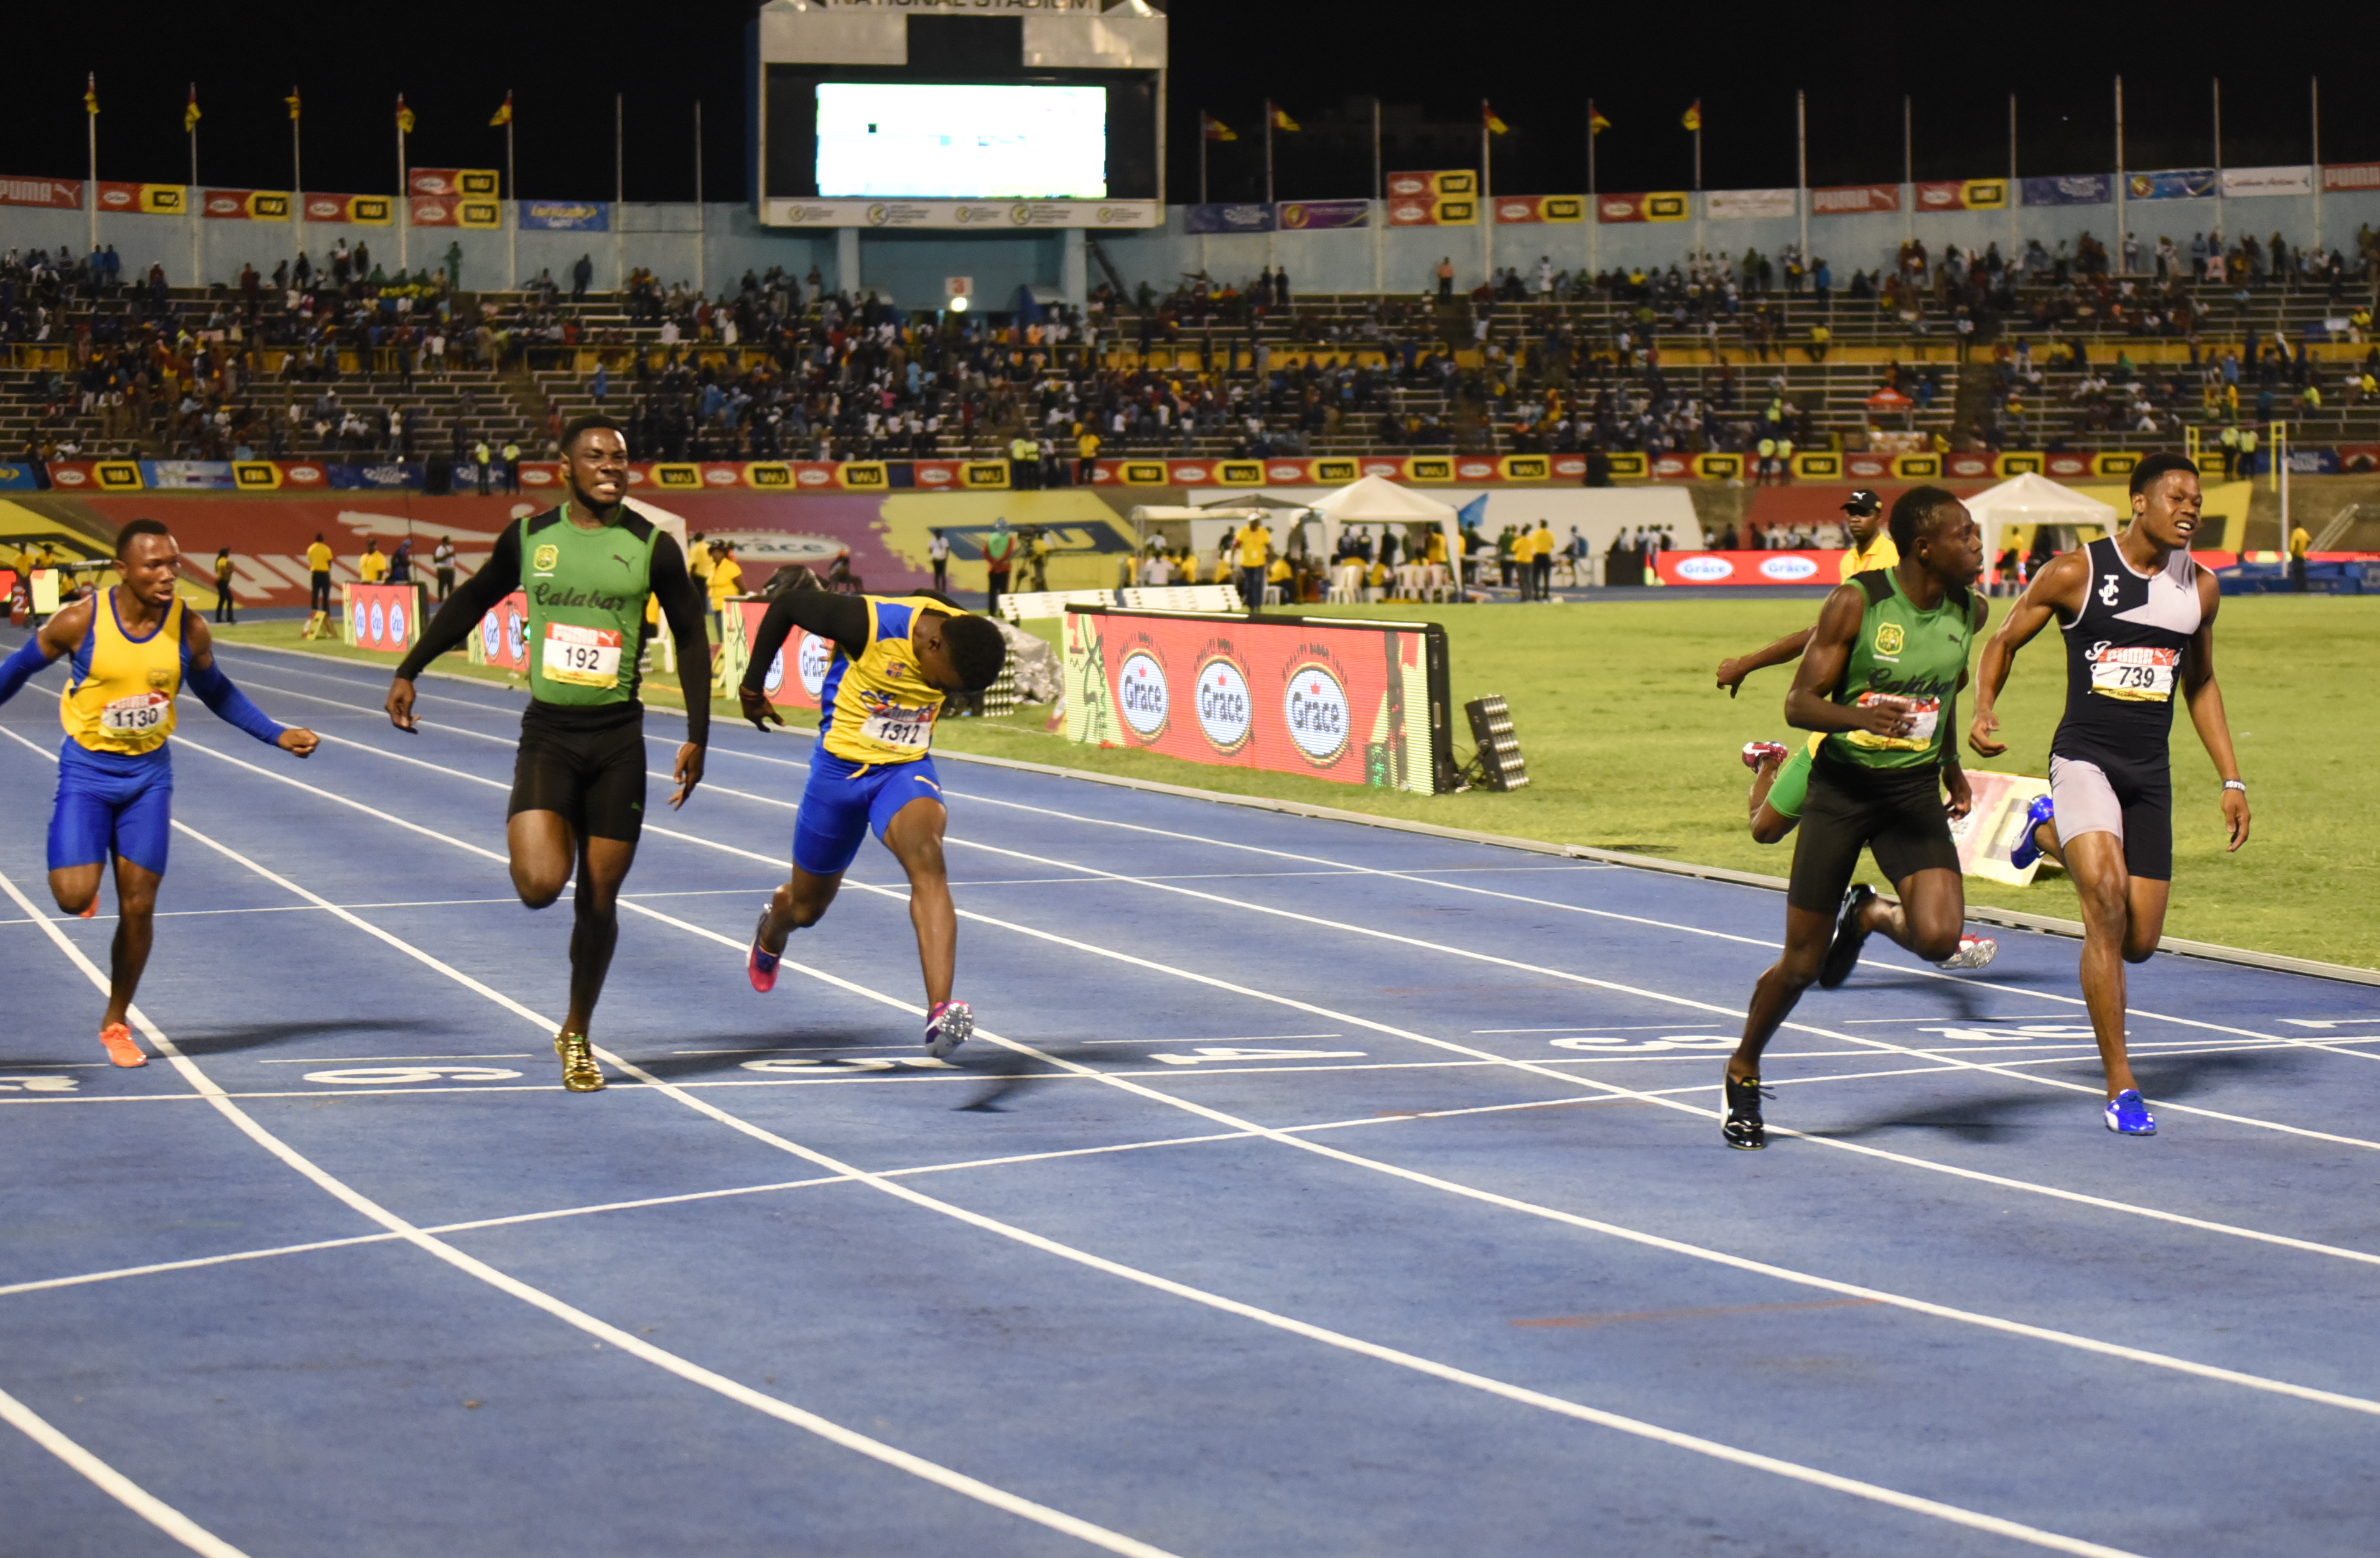 #Champs2019 | Seville, Clayton, Moore star on day 4